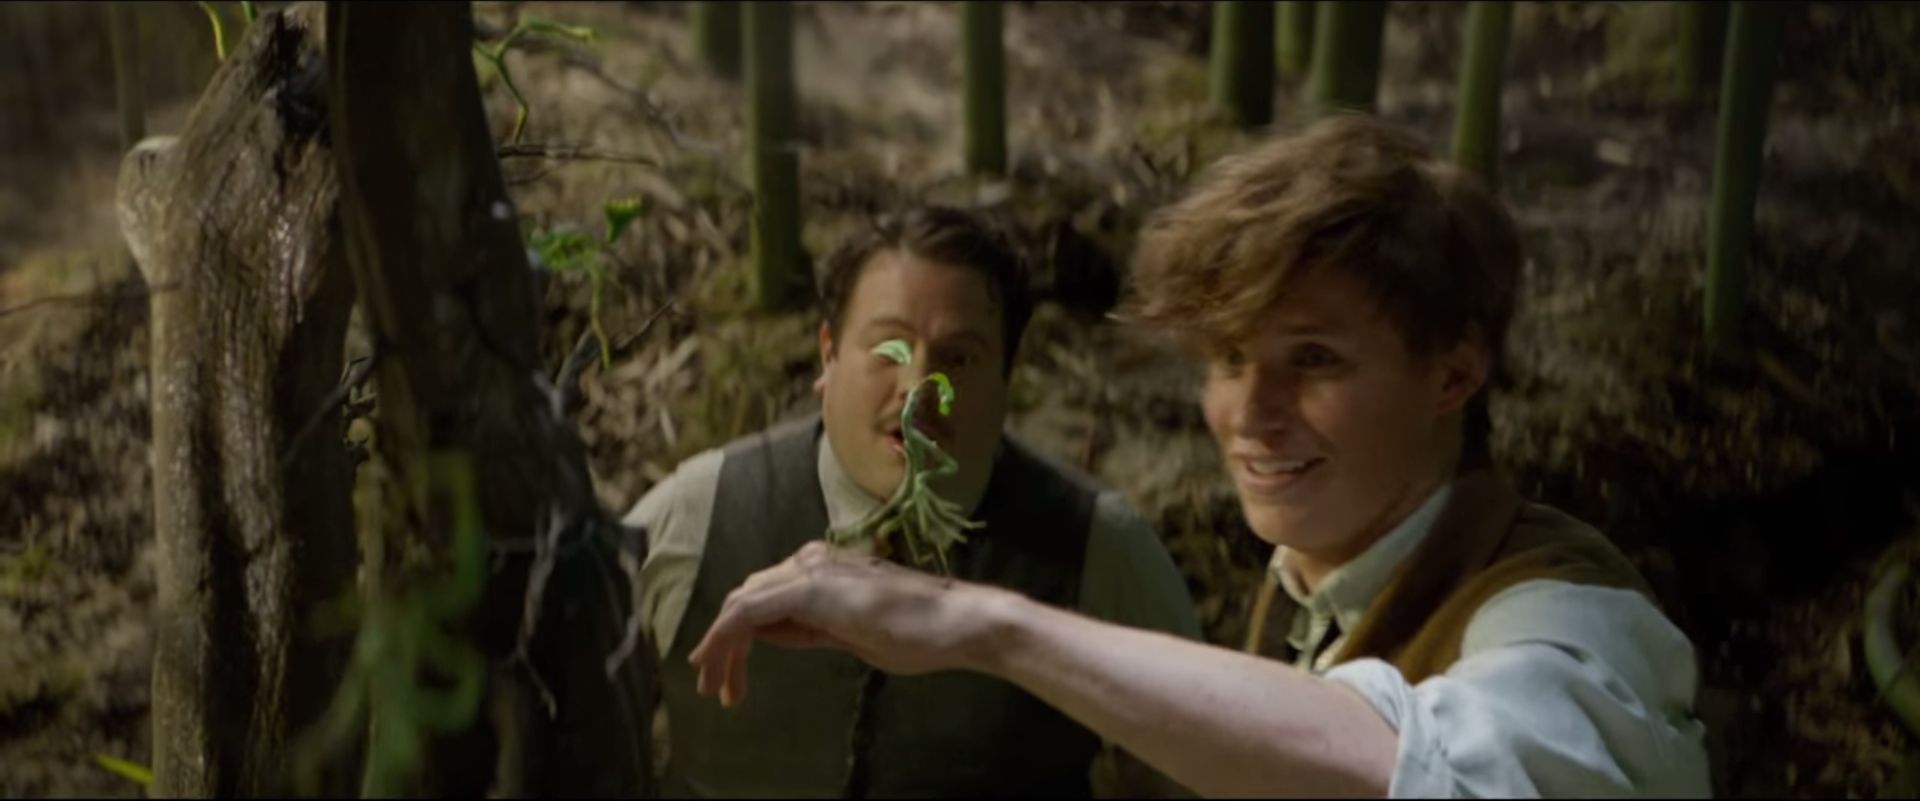 Fantastic Beasts And Where To Find Them Film 2016 Watch Online